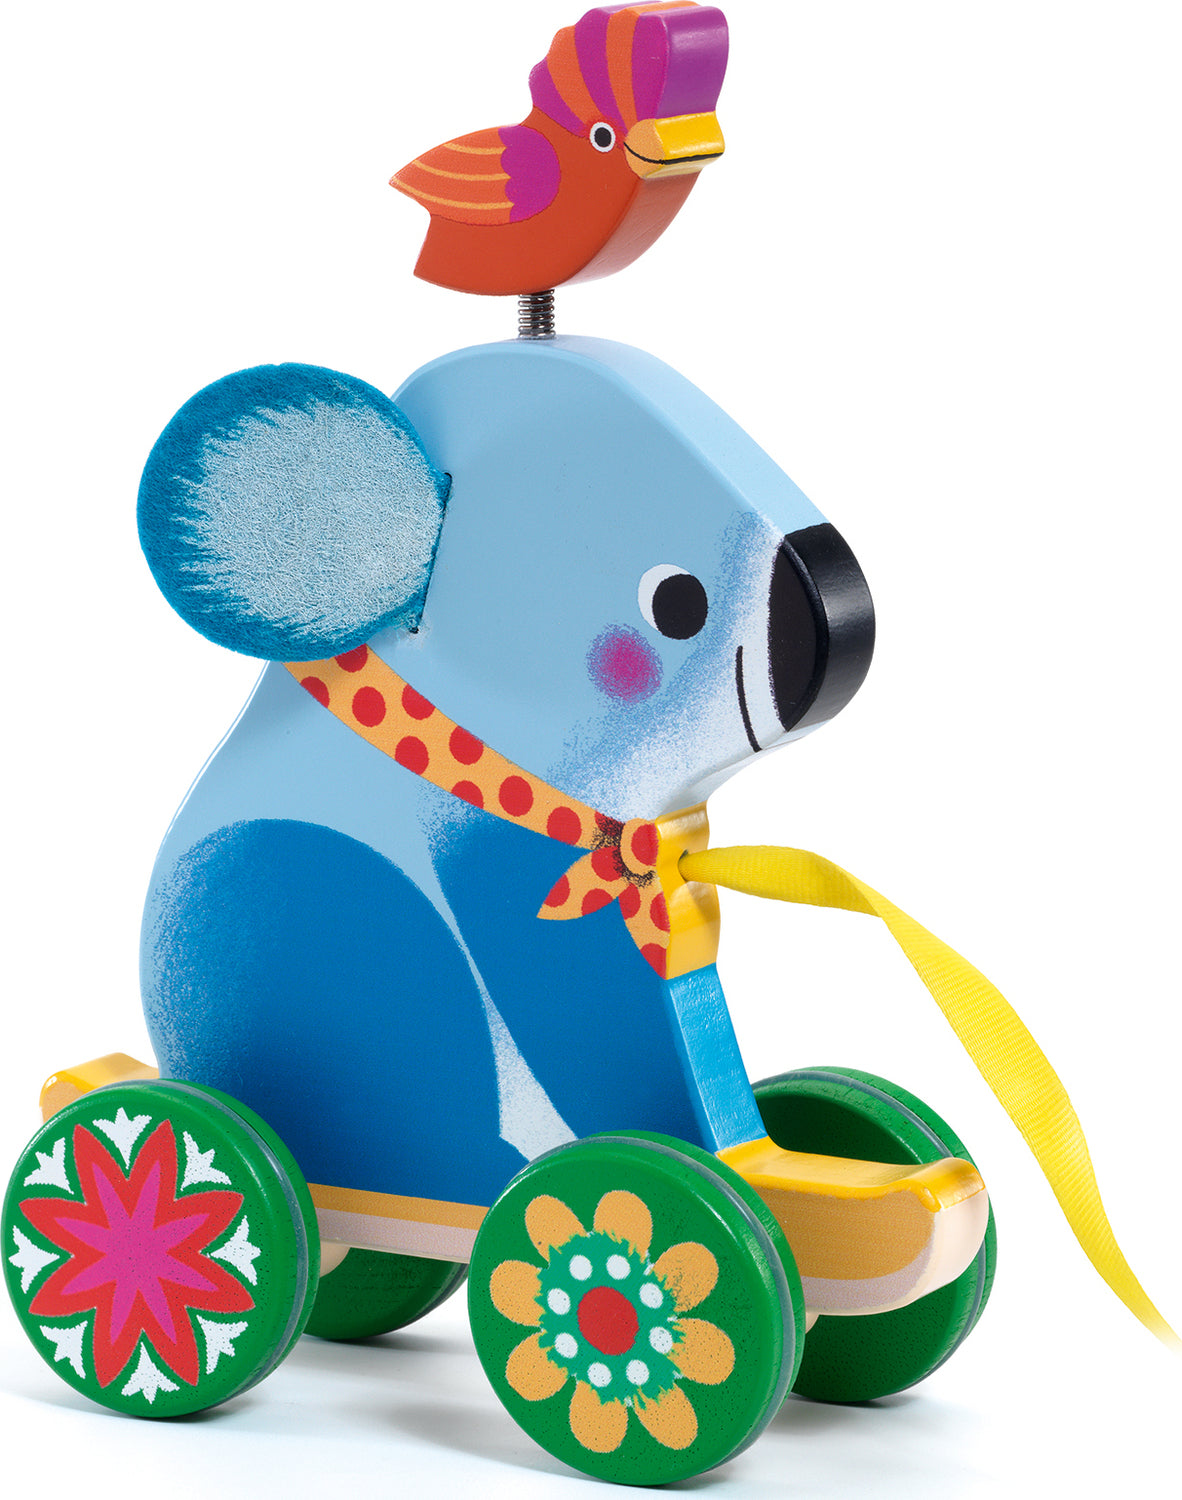 Djeco Otto Wooden Pull Toy